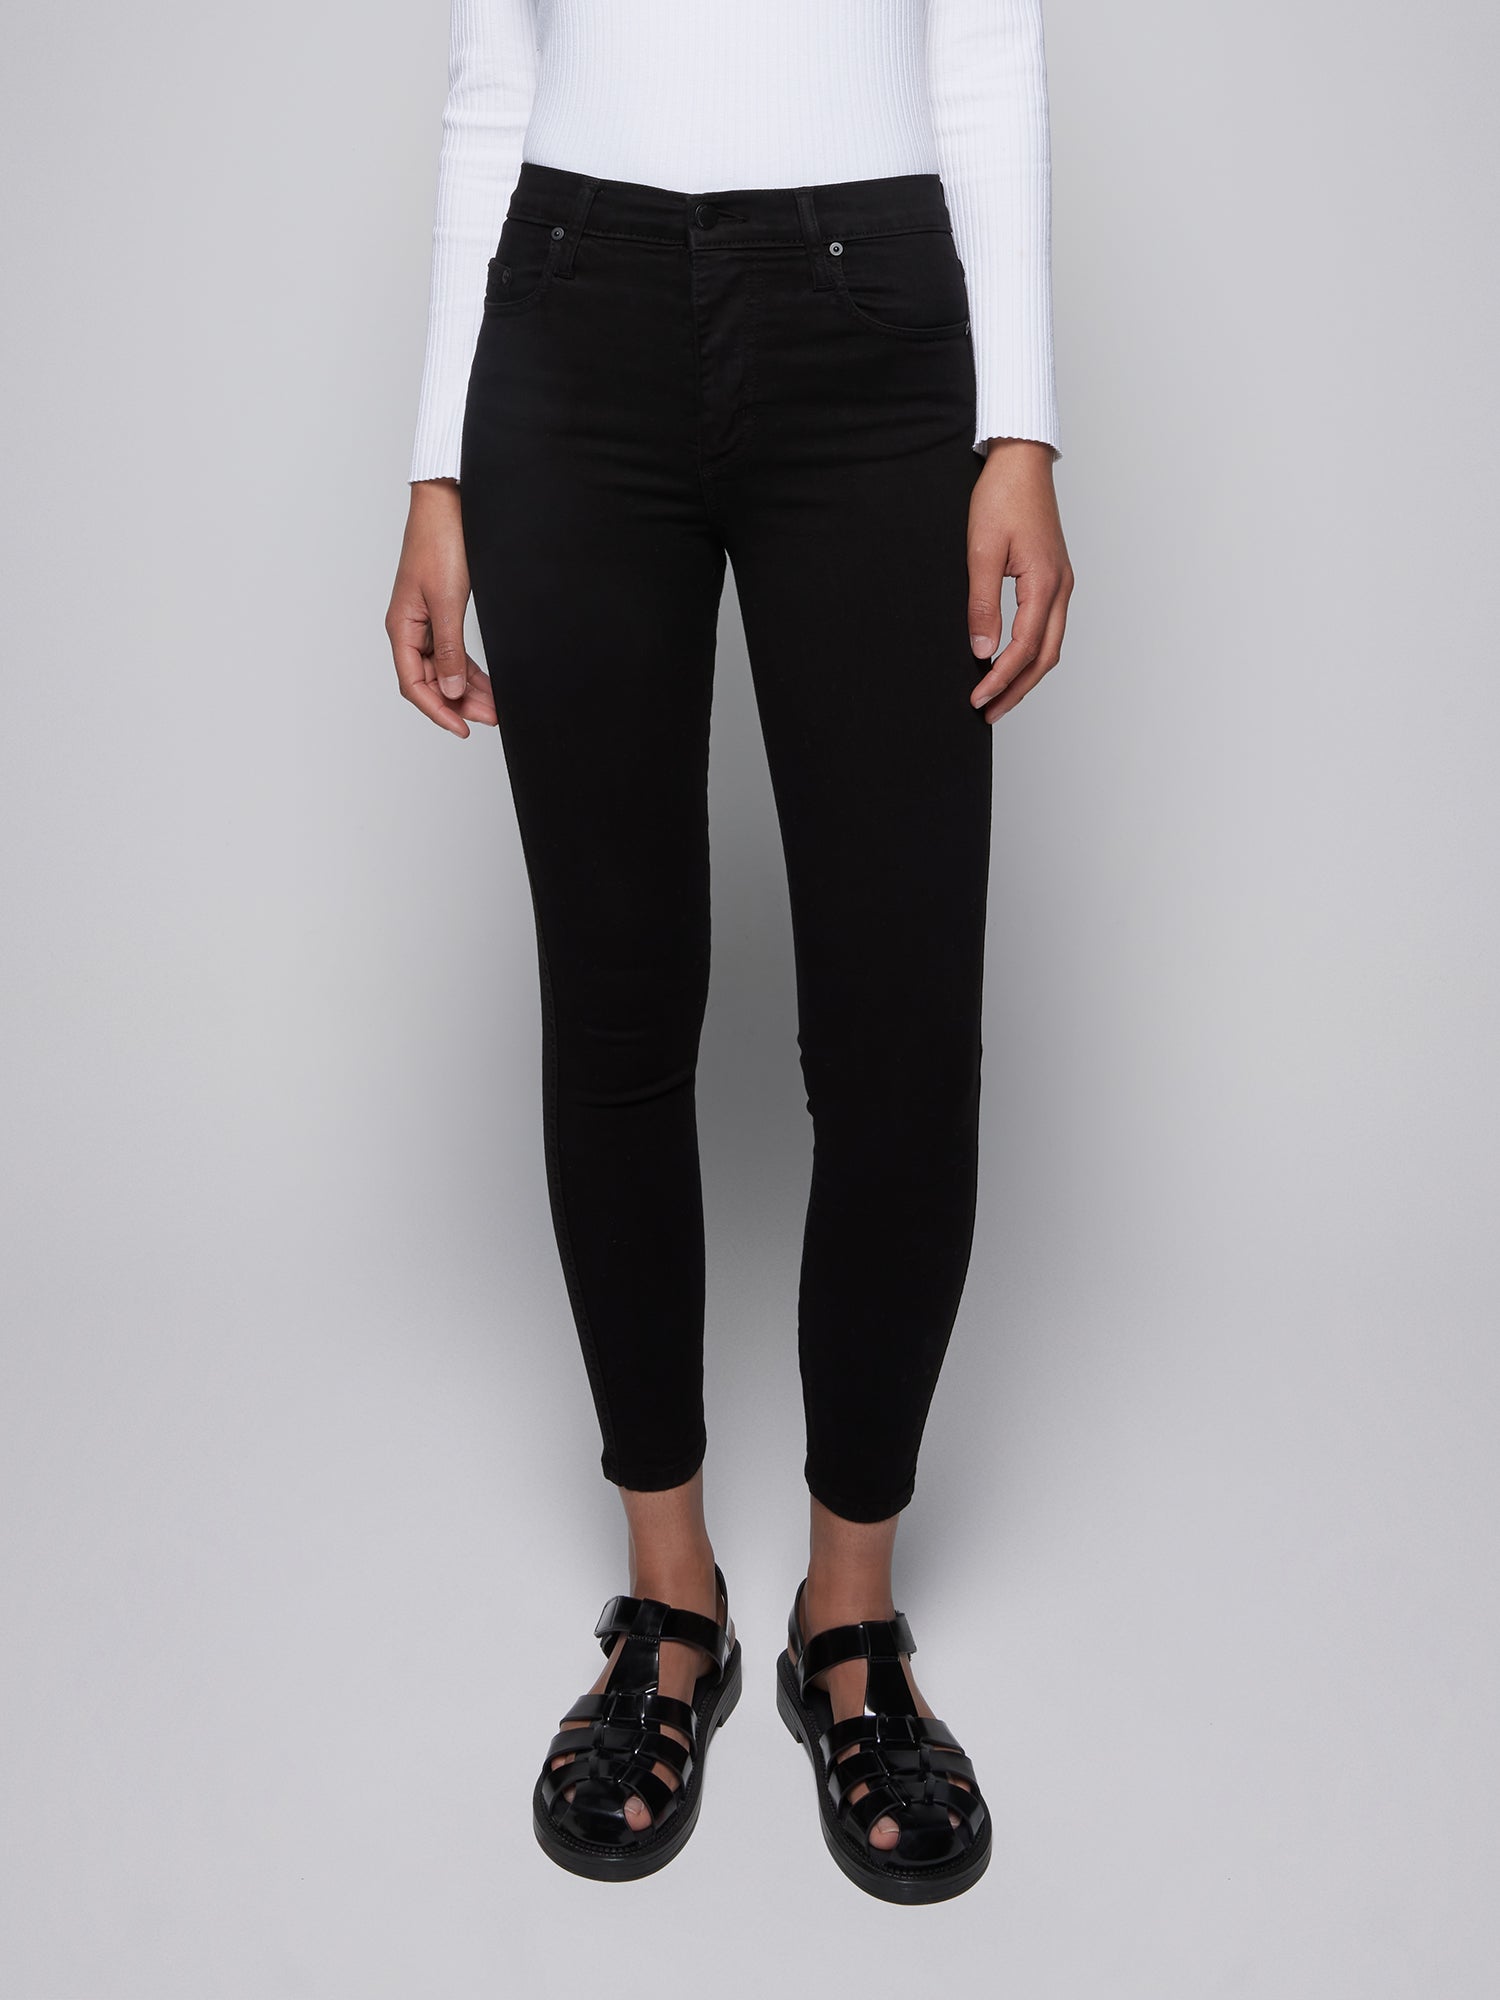 Cult Skinny Ankle Power Blk